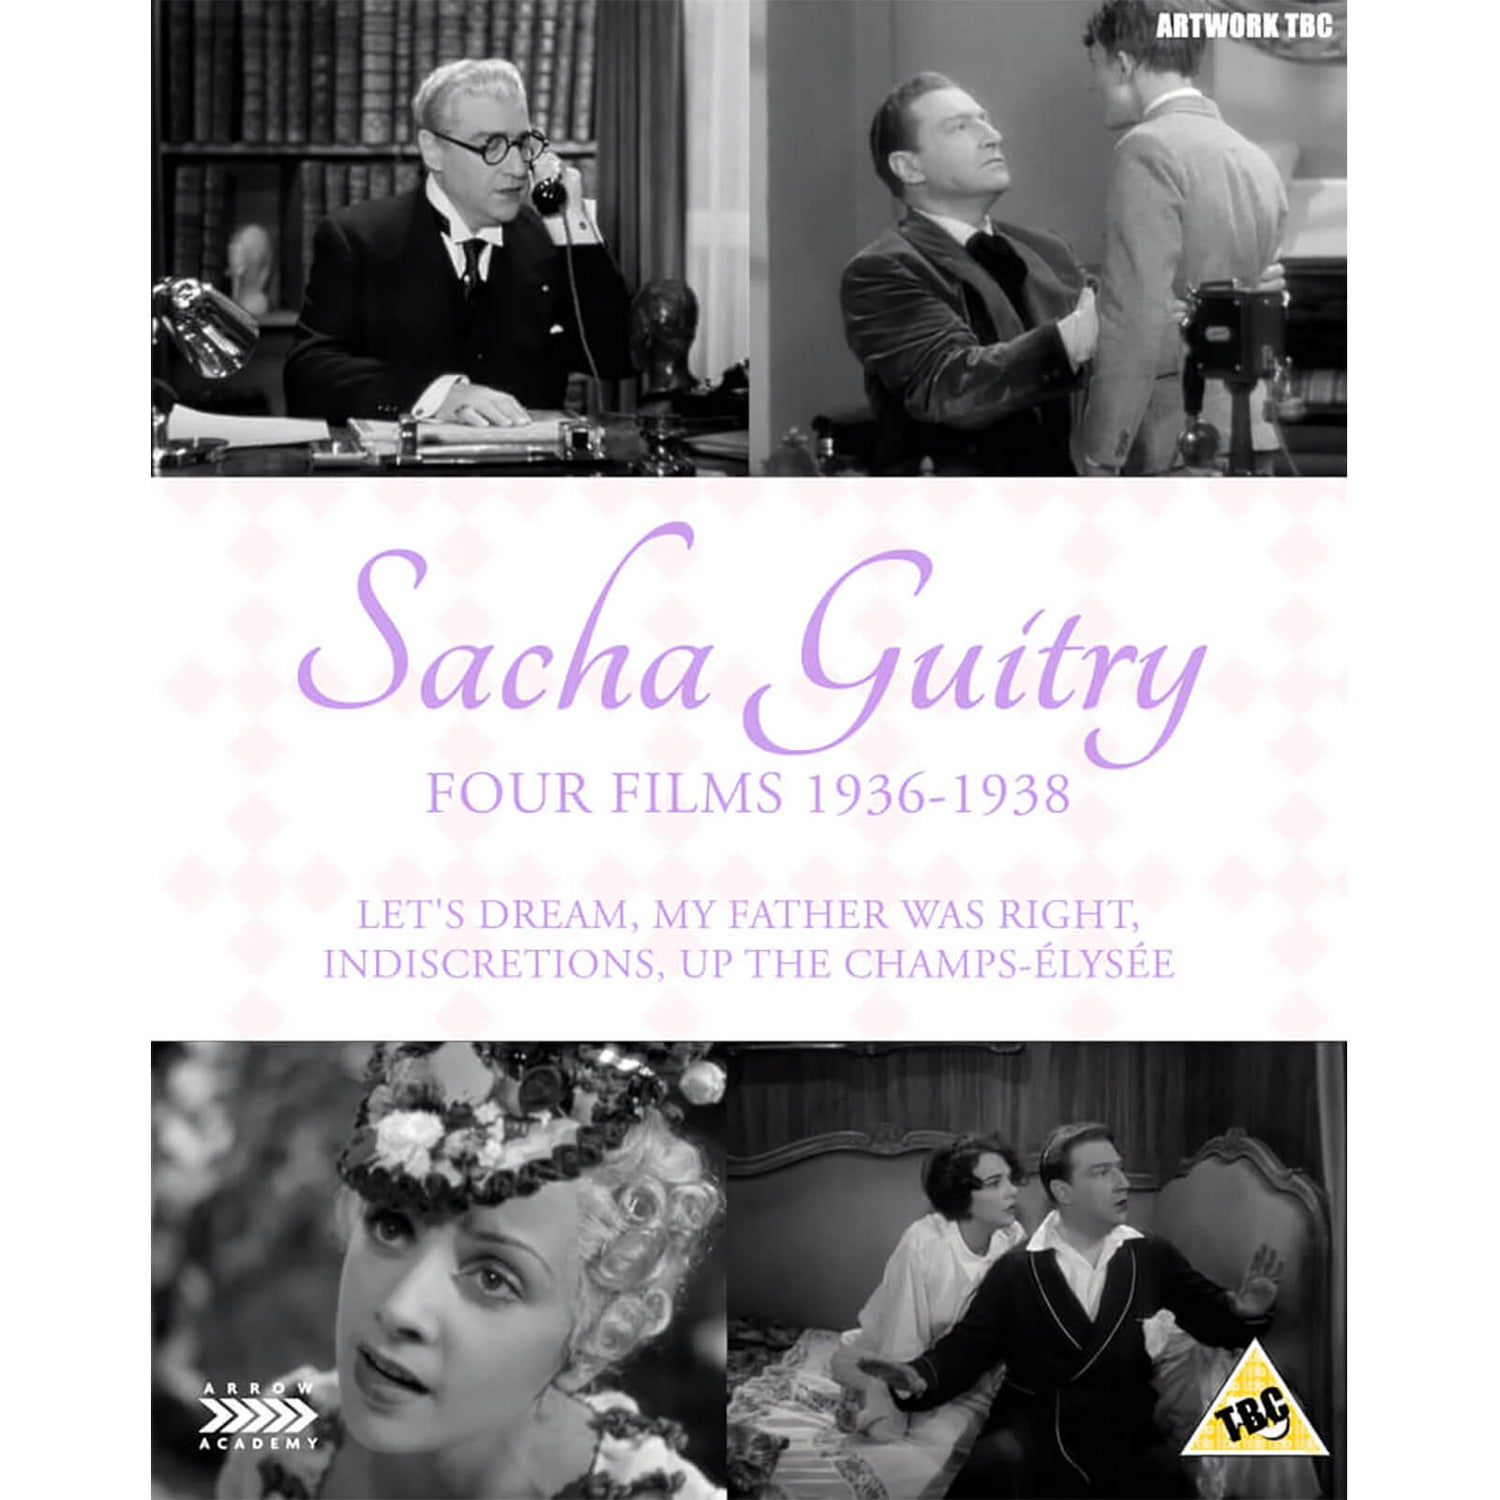 Sacha Guitry | Four Films 1936-1938 | Limited Edition Blu-ray+DVD